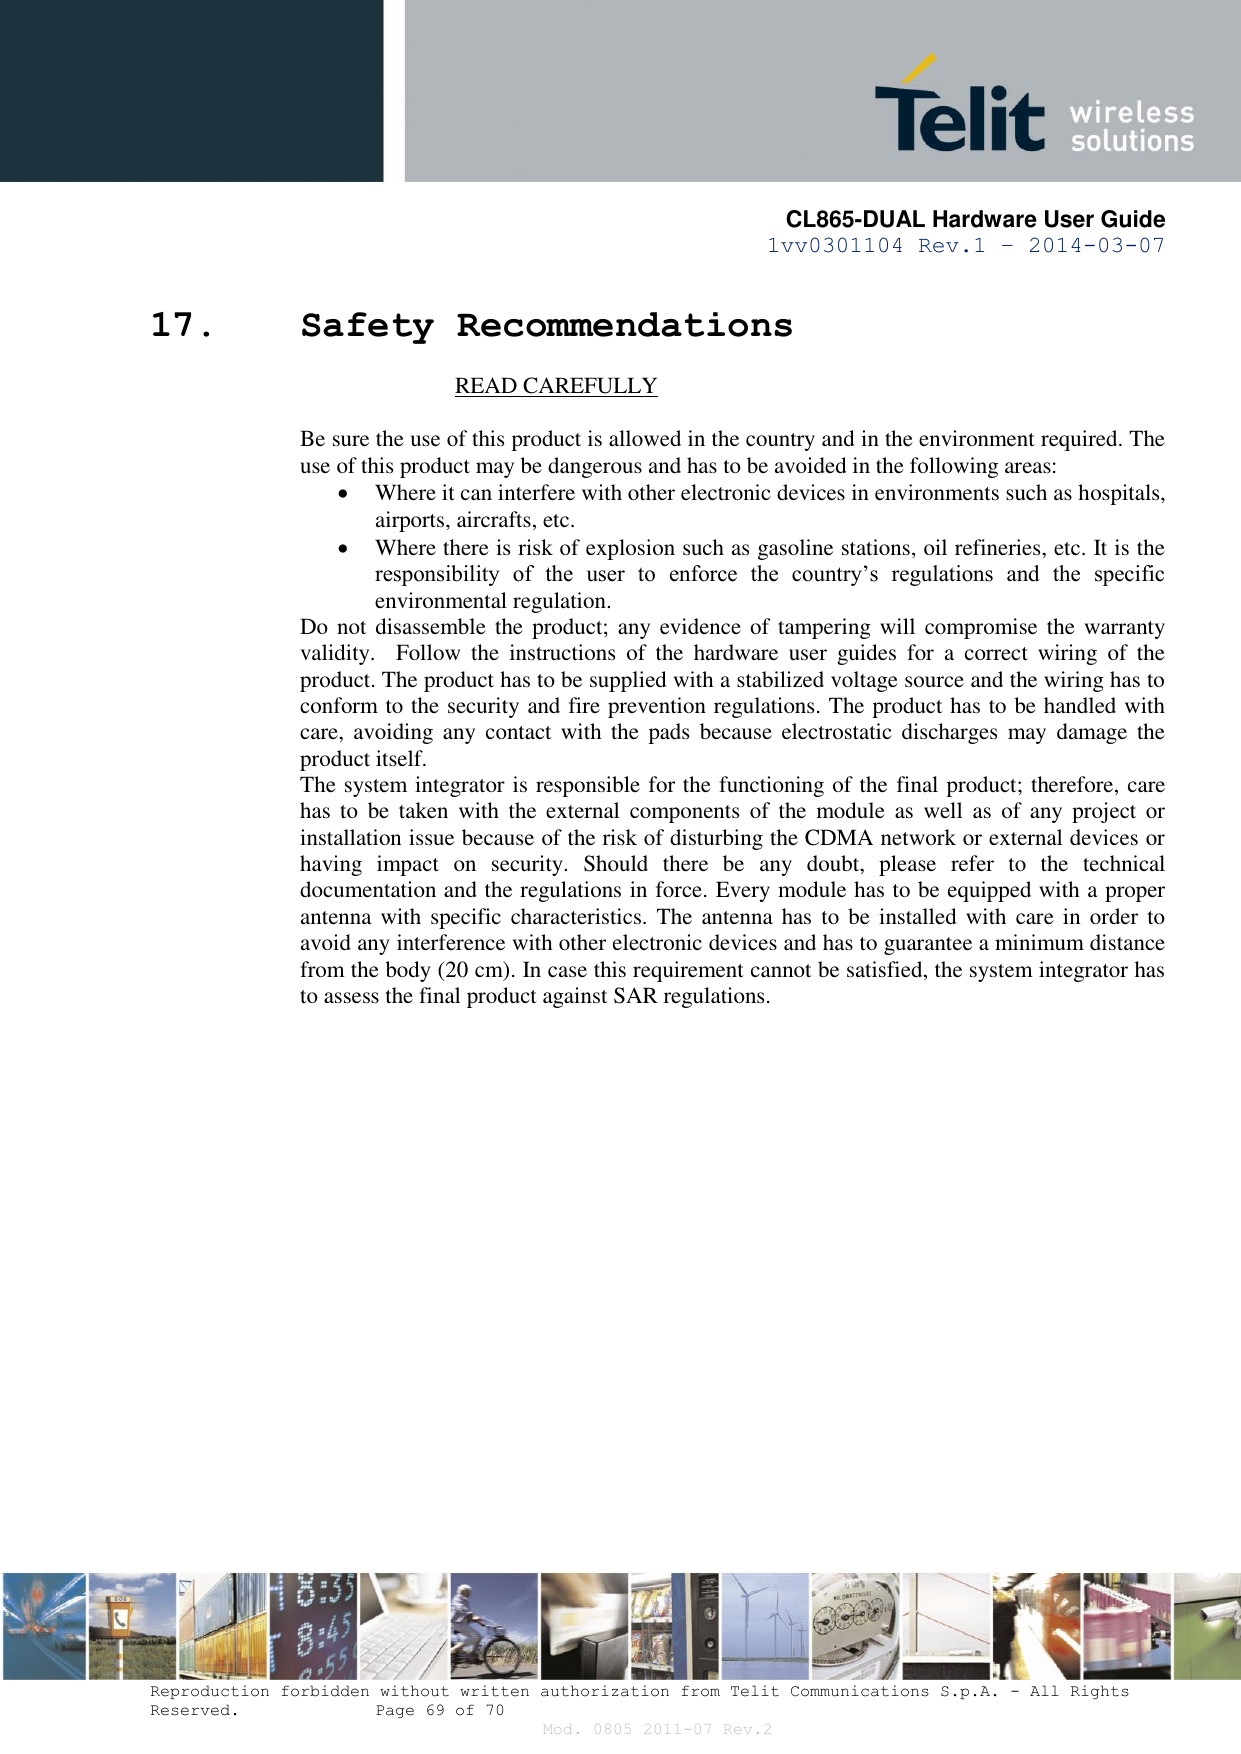       CL865-DUAL Hardware User Guide 1vv0301104 Rev.1 – 2014-03-07  Reproduction forbidden without written authorization from Telit Communications S.p.A. - All Rights Reserved.    Page 69 of 70 Mod. 0805 2011-07 Rev.2 17. Safety Recommendations                            READ CAREFULLY  Be sure the use of this product is allowed in the country and in the environment required. The use of this product may be dangerous and has to be avoided in the following areas:  Where it can interfere with other electronic devices in environments such as hospitals, airports, aircrafts, etc.  Where there is risk of explosion such as gasoline stations, oil refineries, etc. It is the responsibility  of  the  user  to  enforce  the  country’s  regulations  and  the  specific environmental regulation. Do not disassemble the product; any evidence of tampering will compromise  the warranty validity.    Follow  the  instructions  of  the  hardware  user  guides  for  a  correct  wiring  of  the product. The product has to be supplied with a stabilized voltage source and the wiring has to conform to the security and fire prevention regulations. The product has to be handled with care,  avoiding any  contact with  the  pads  because  electrostatic discharges  may  damage the product itself.  The system integrator is responsible for the functioning of the final product; therefore, care has  to  be  taken  with  the  external  components  of  the  module  as  well  as  of  any  project  or installation issue because of the risk of disturbing the CDMA network or external devices or having  impact  on  security.  Should  there  be  any  doubt,  please  refer  to  the  technical documentation and the regulations in force. Every module has to be equipped with a proper antenna with specific  characteristics. The antenna has to  be  installed with care  in  order to avoid any interference with other electronic devices and has to guarantee a minimum distance from the body (20 cm). In case this requirement cannot be satisfied, the system integrator has to assess the final product against SAR regulations.   